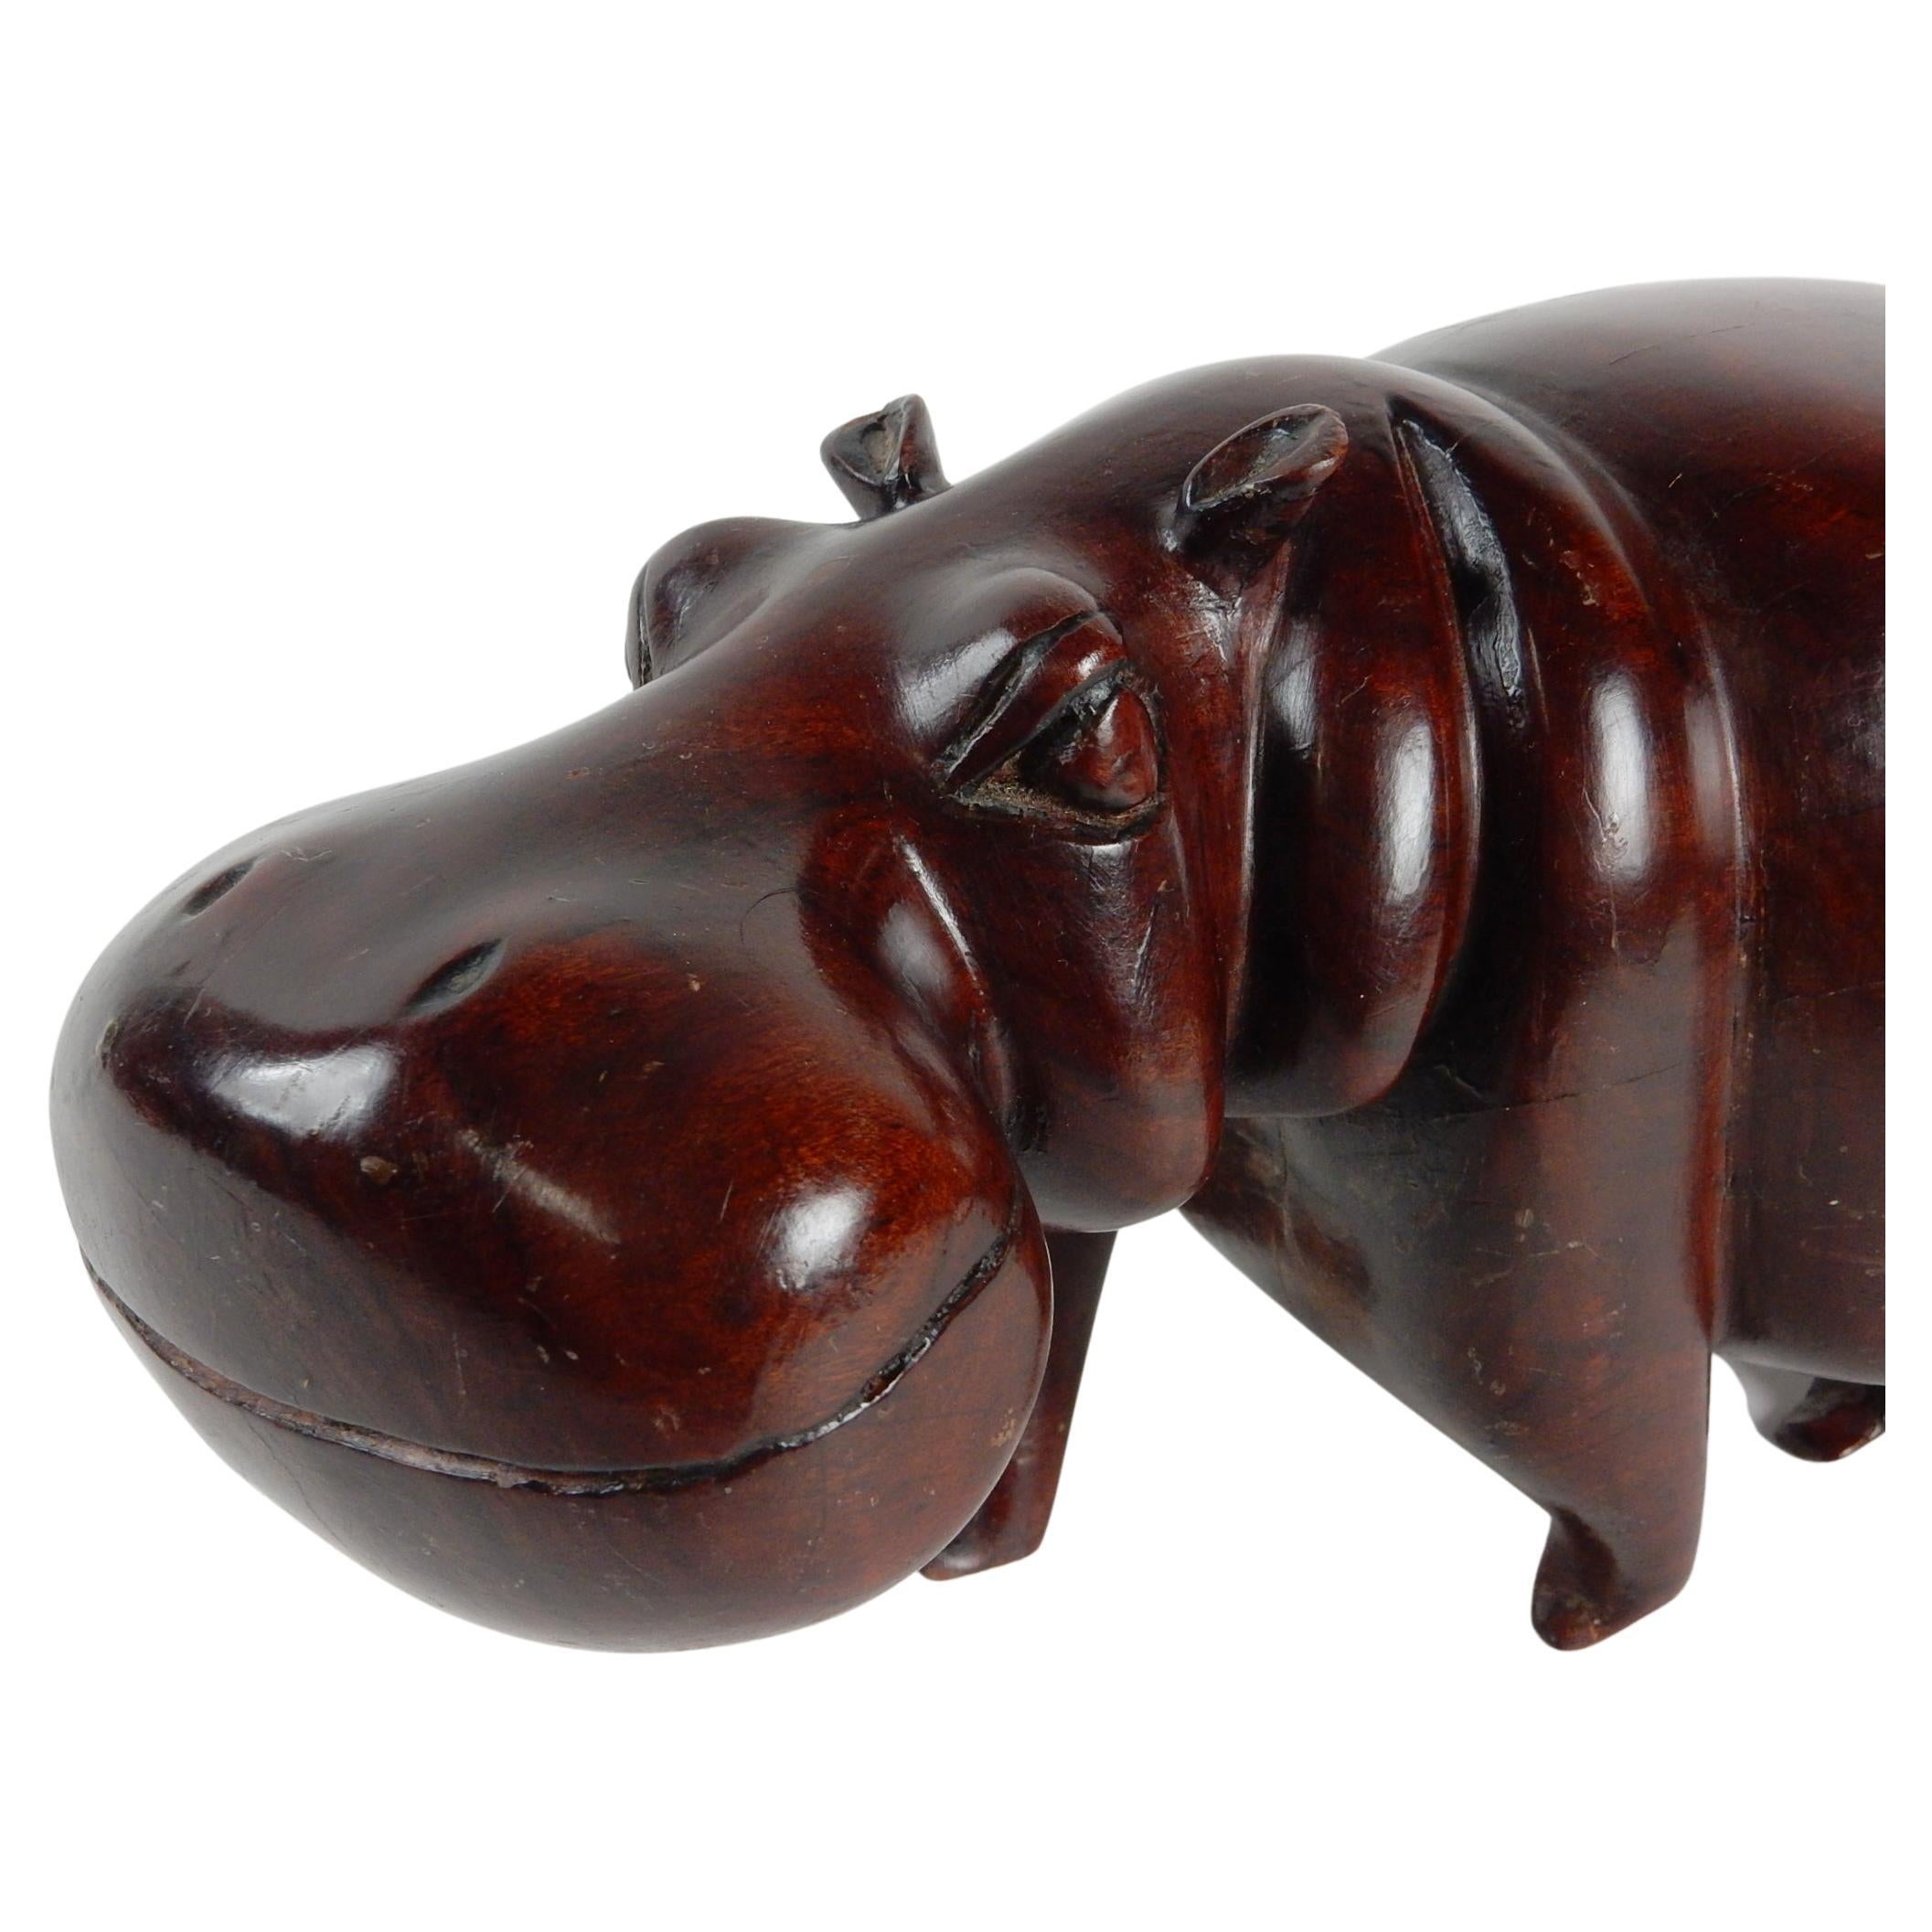 Lovely hand sculpted Teakwood Hippopotamus. circa 1960s.
This guy will be a fabulous addition to your home décor and Hippos bring good luck!